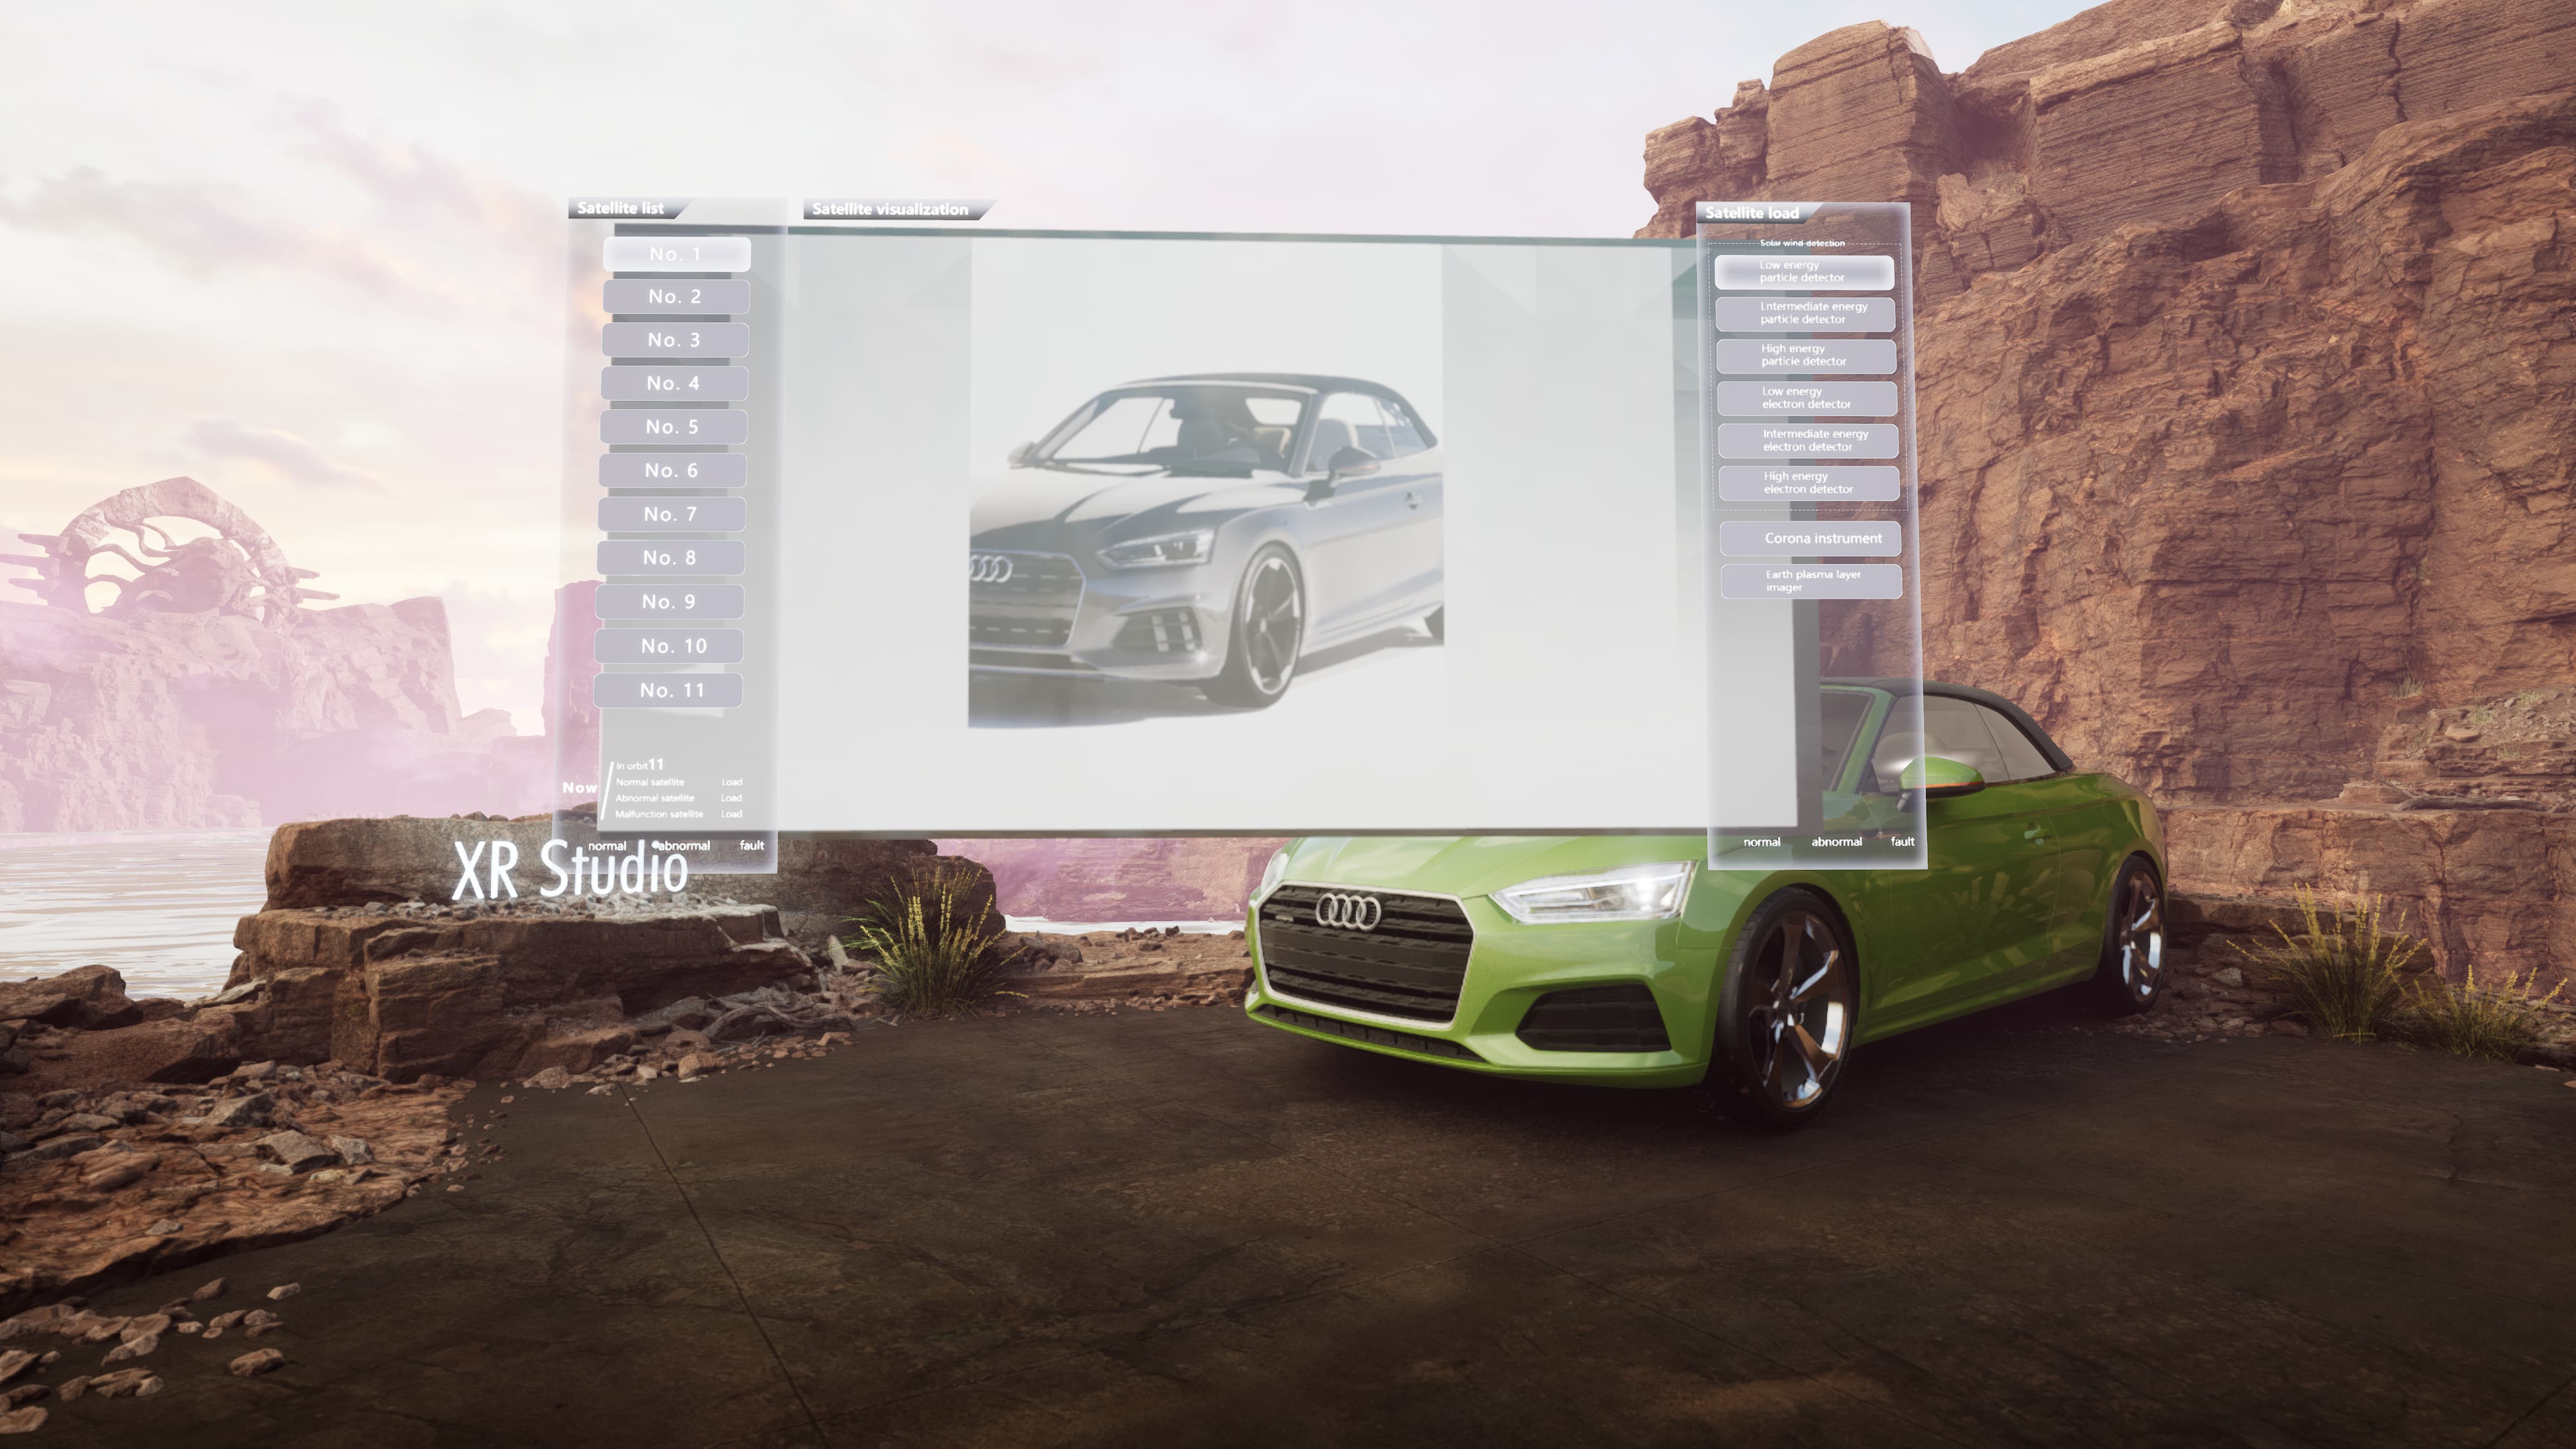 XR_Studio,Unreal Engine 4,Virtual production,Unreal Engine 5, UE4, UE5, Green_Screen, Live_Action,Car, BMW, LED_WAll @ Mathias Nell